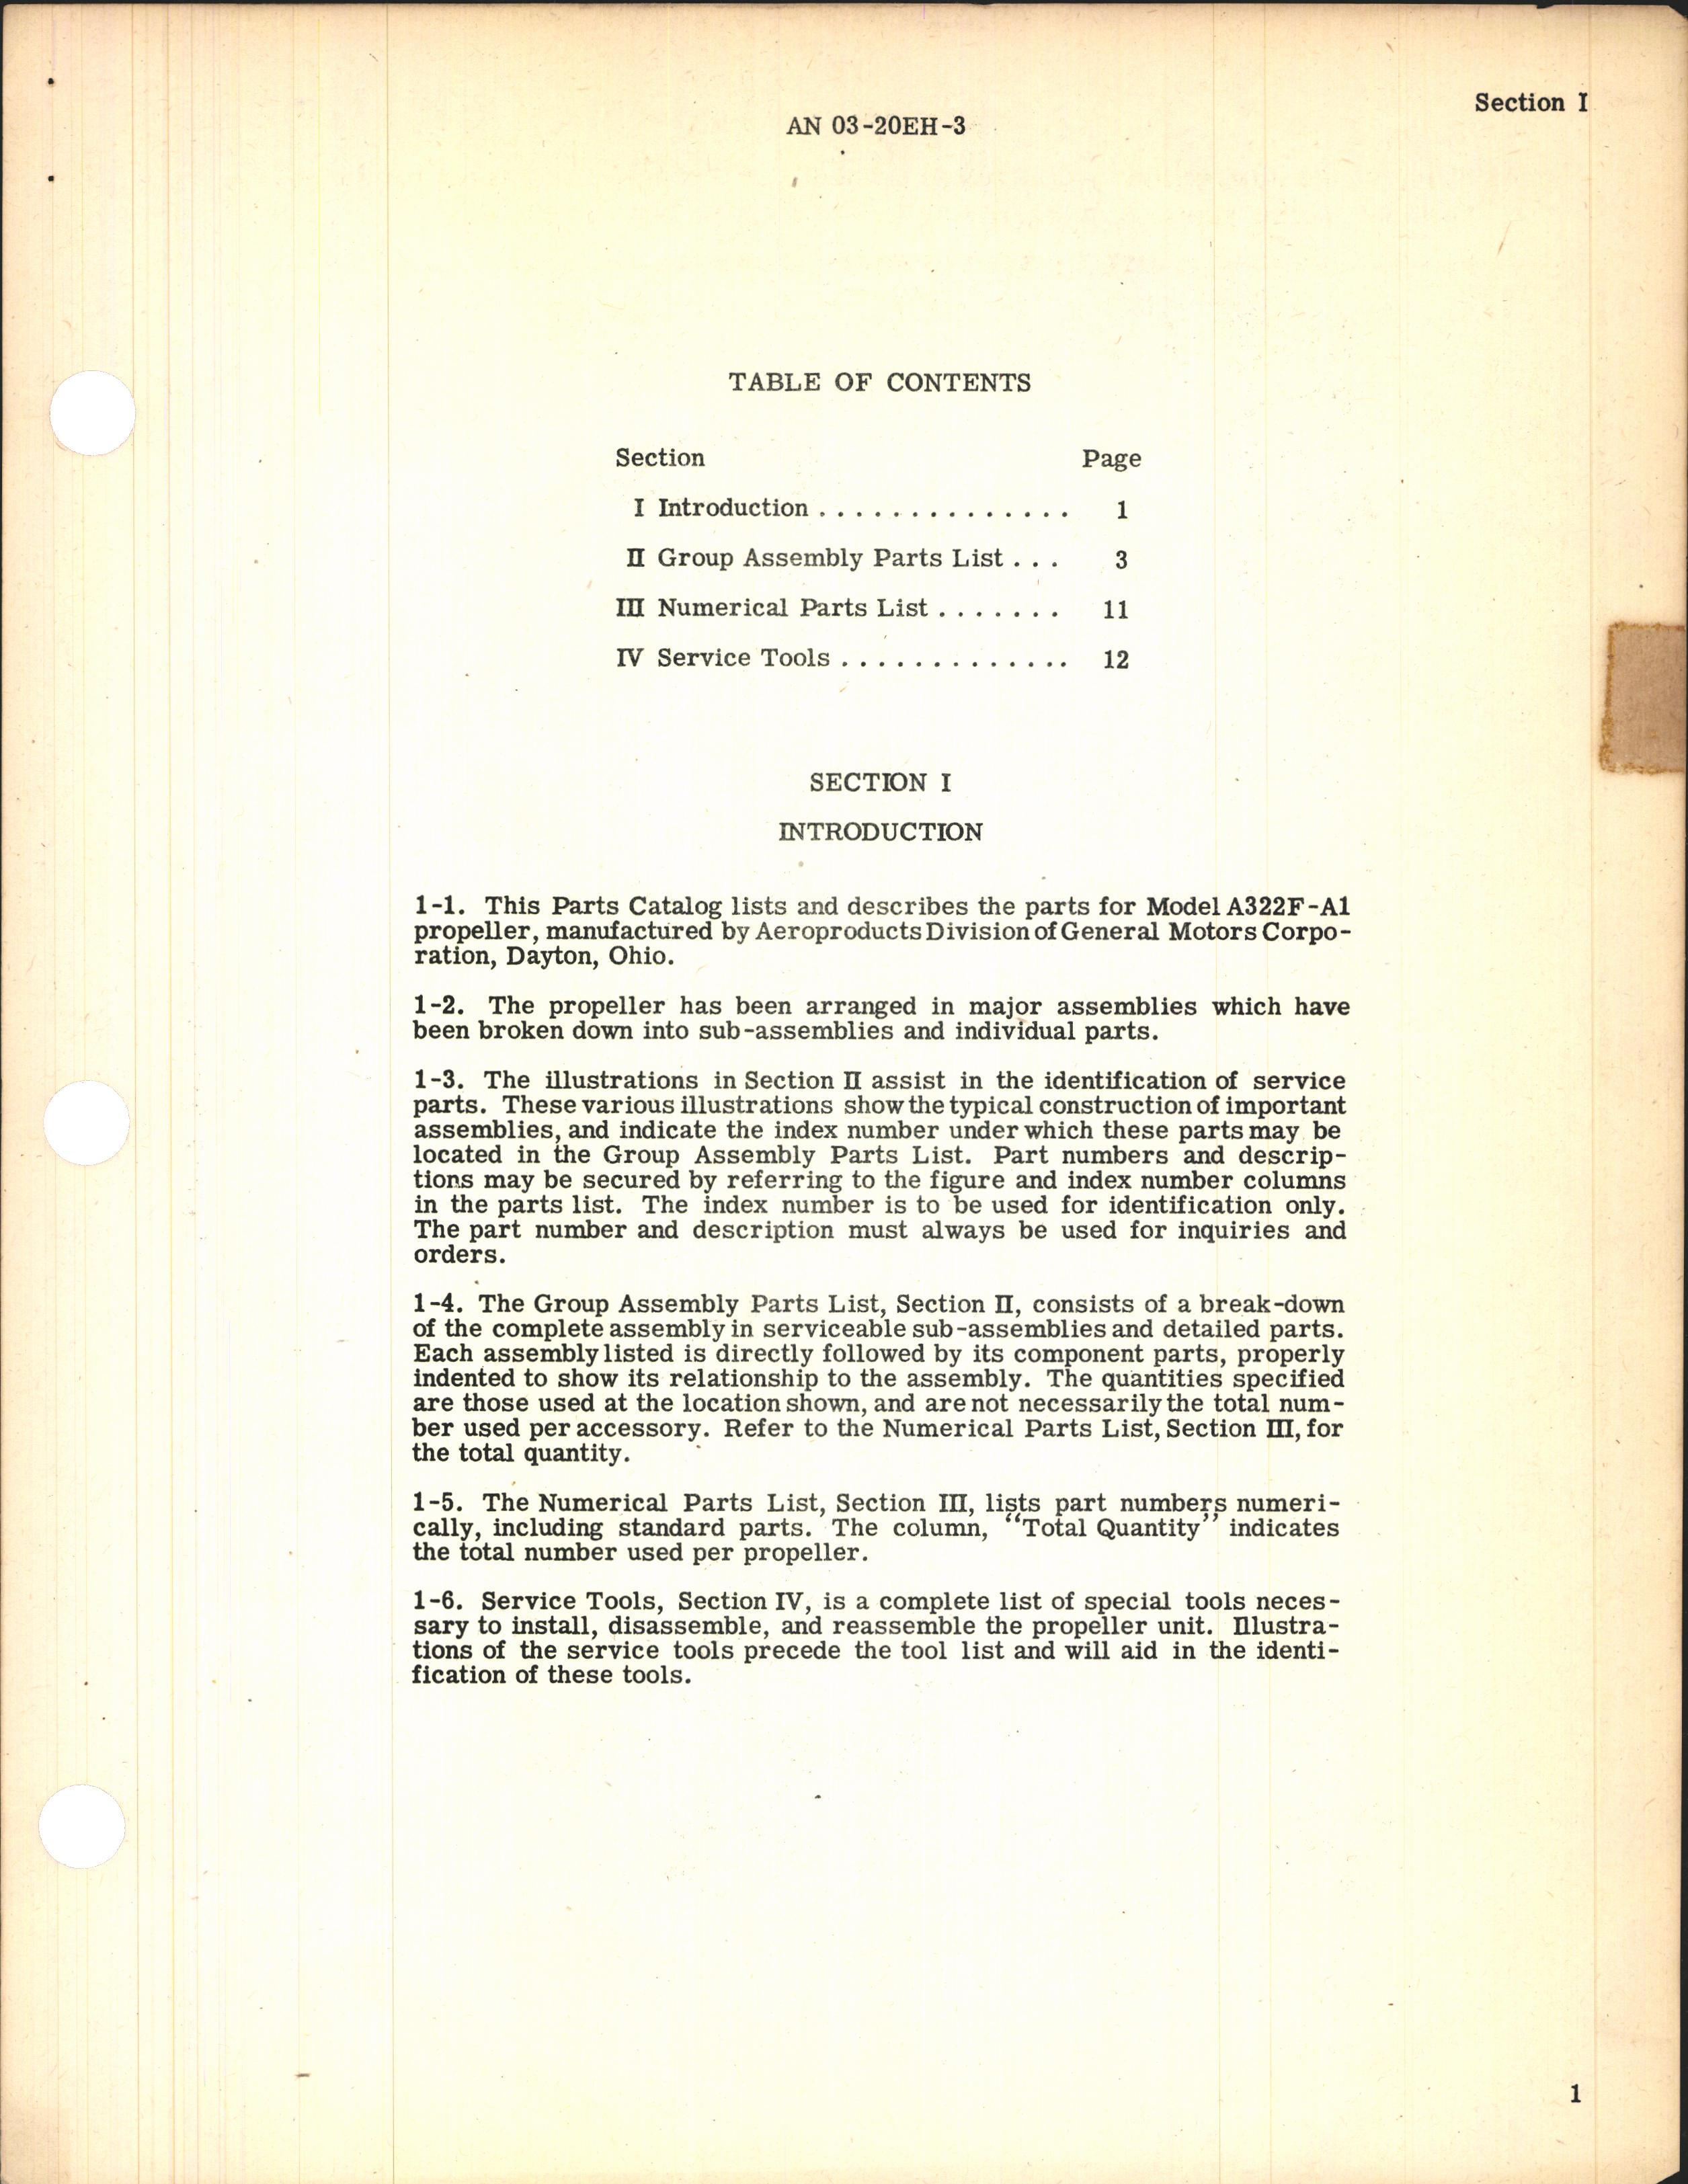 Sample page 3 from AirCorps Library document: Parts Catalog for Hydraulic Propeller Model A332F-A1